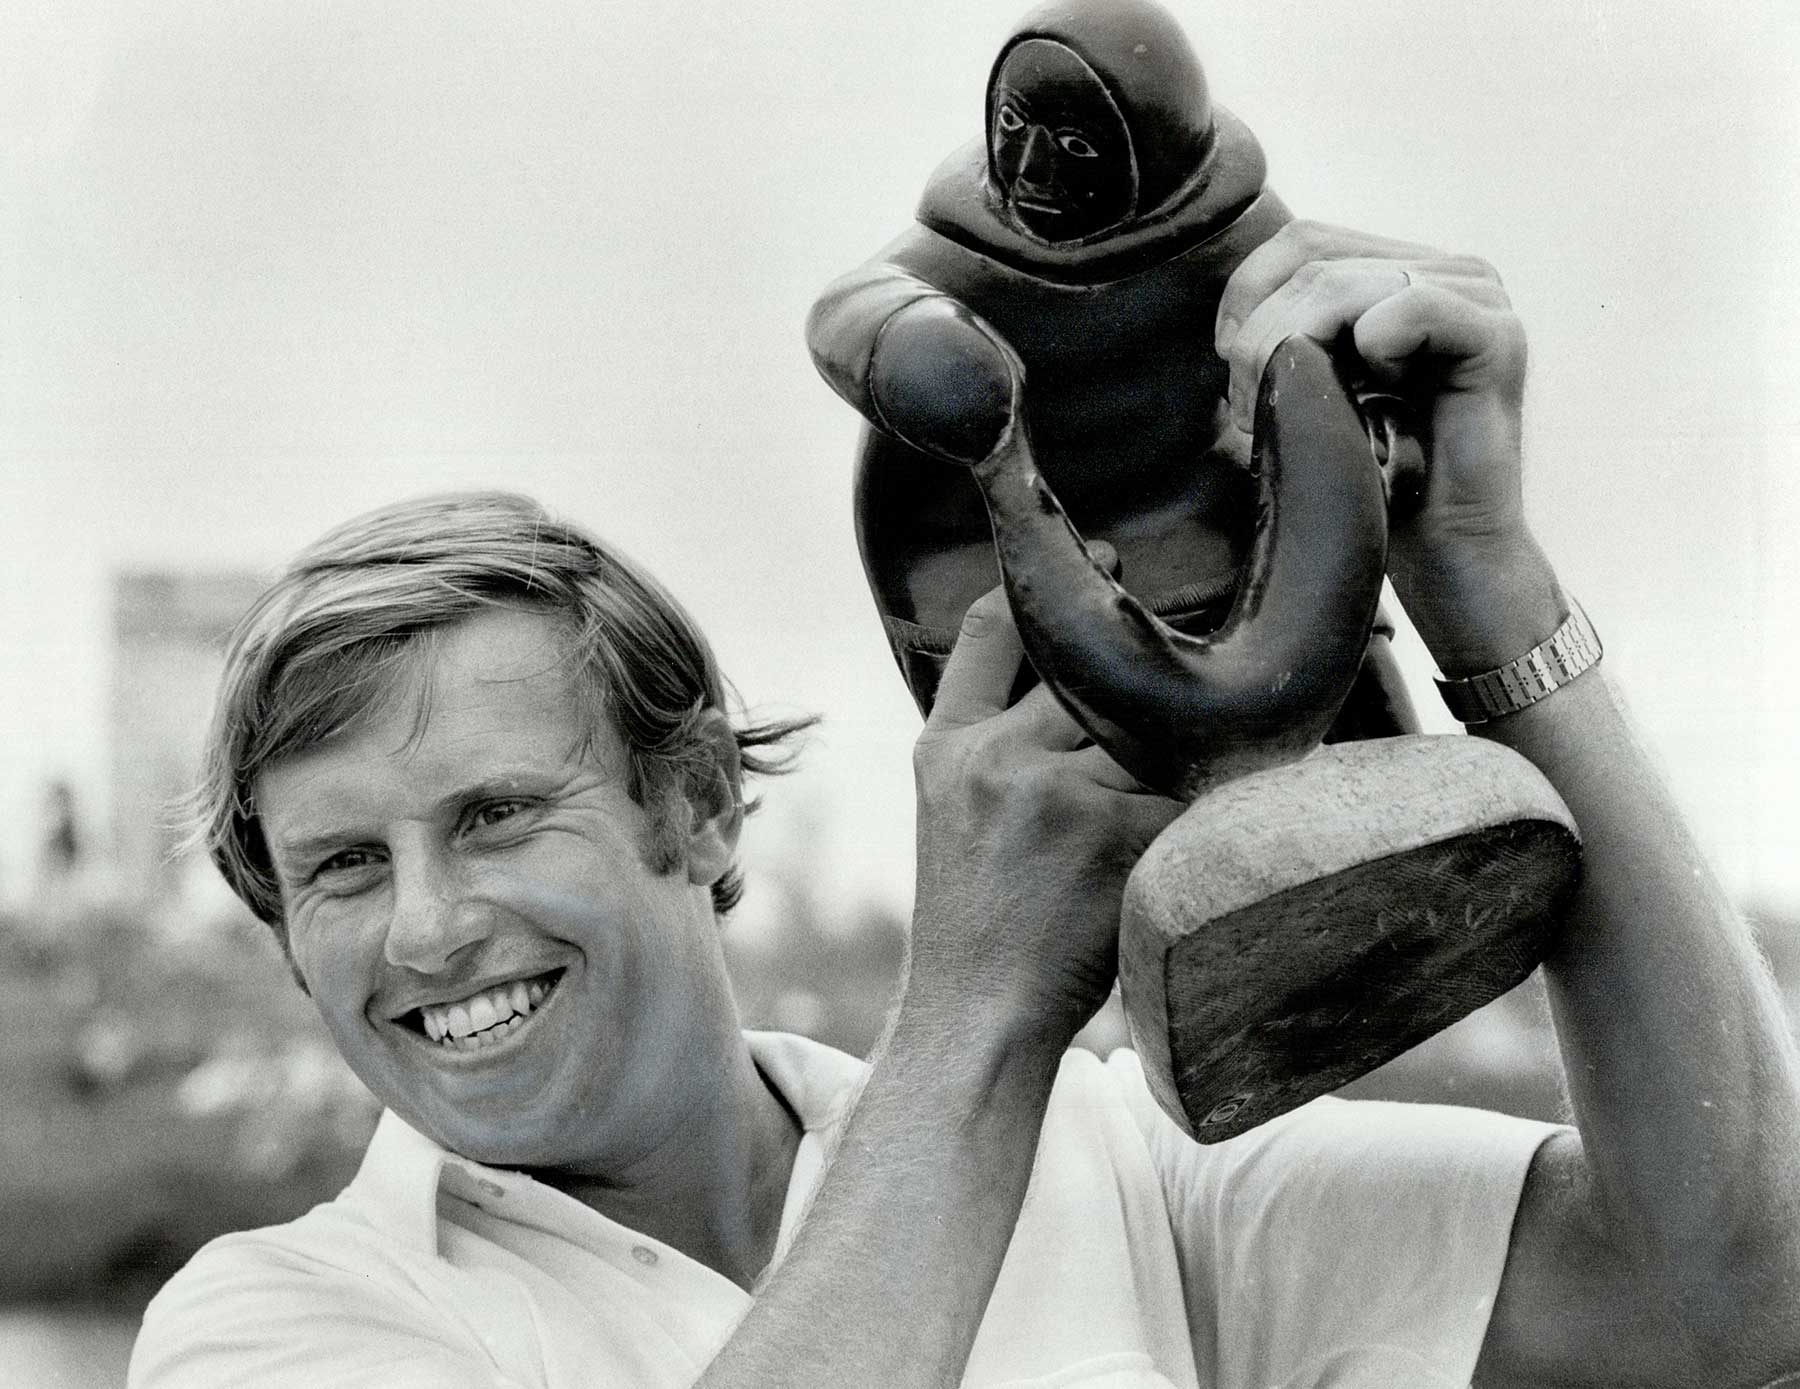 Peter Oosterhuis hoists the trophy after winning the 1981 Canadian Open, his only PGA Tour victory.